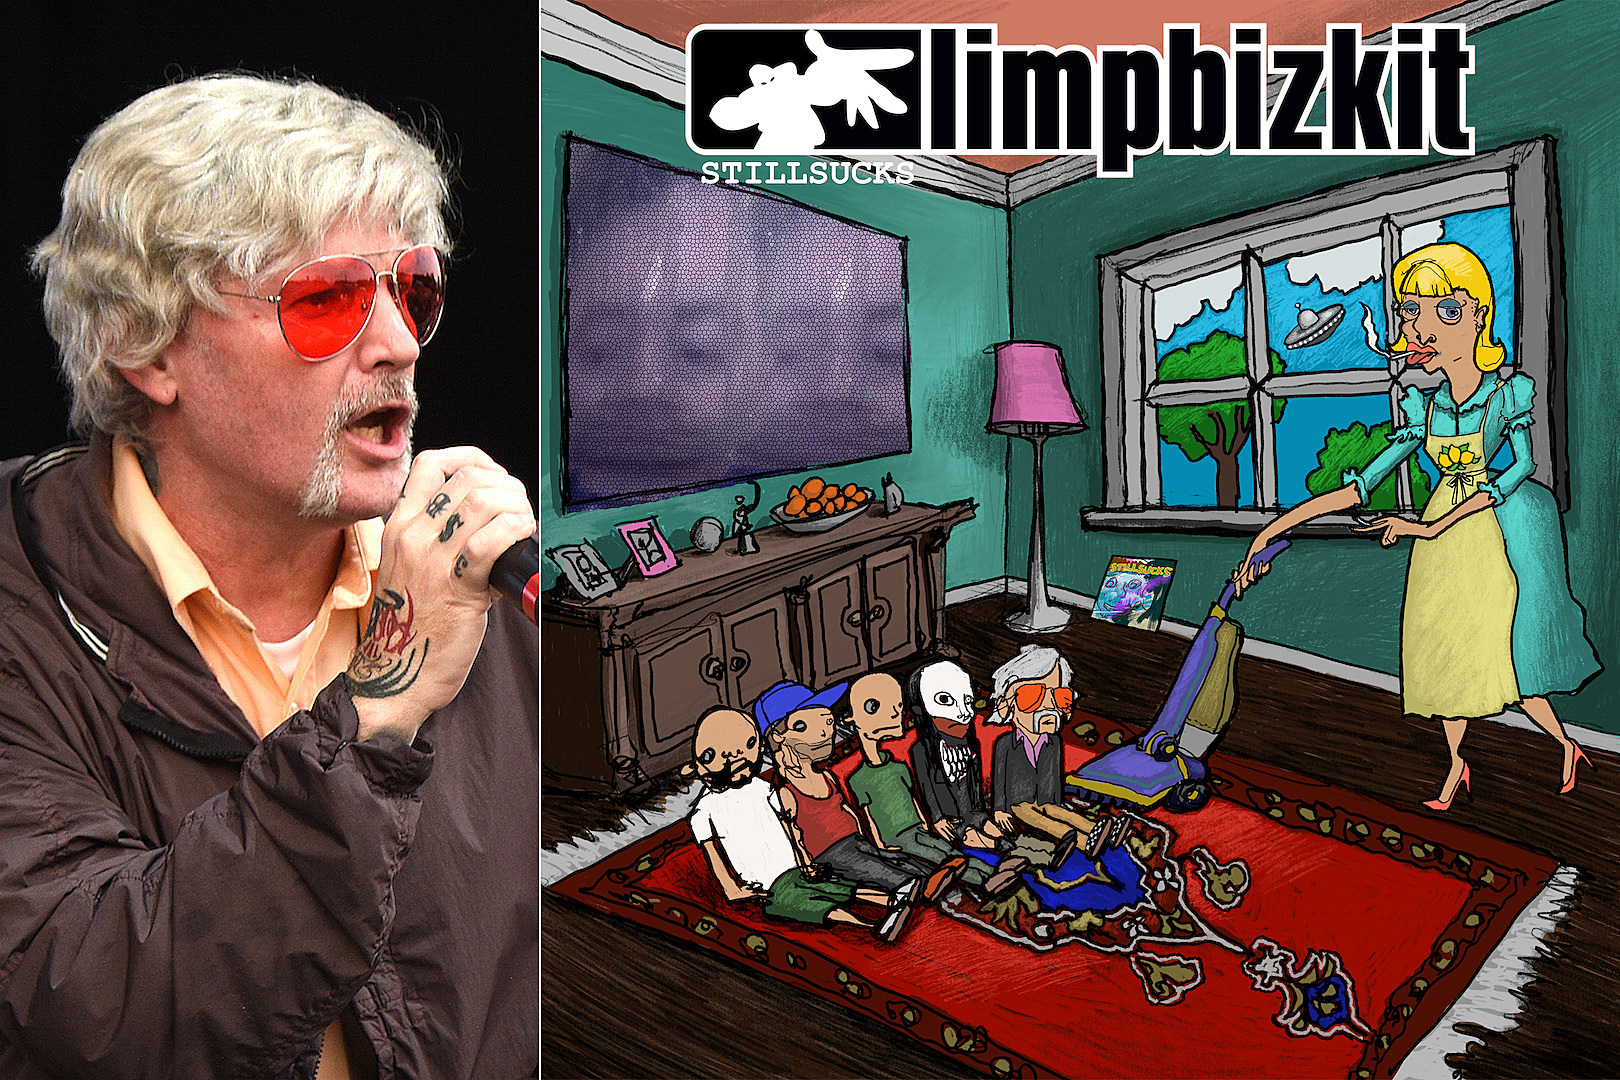 Why Are There No Physical Copies of Limp Bizkit’s New Album?